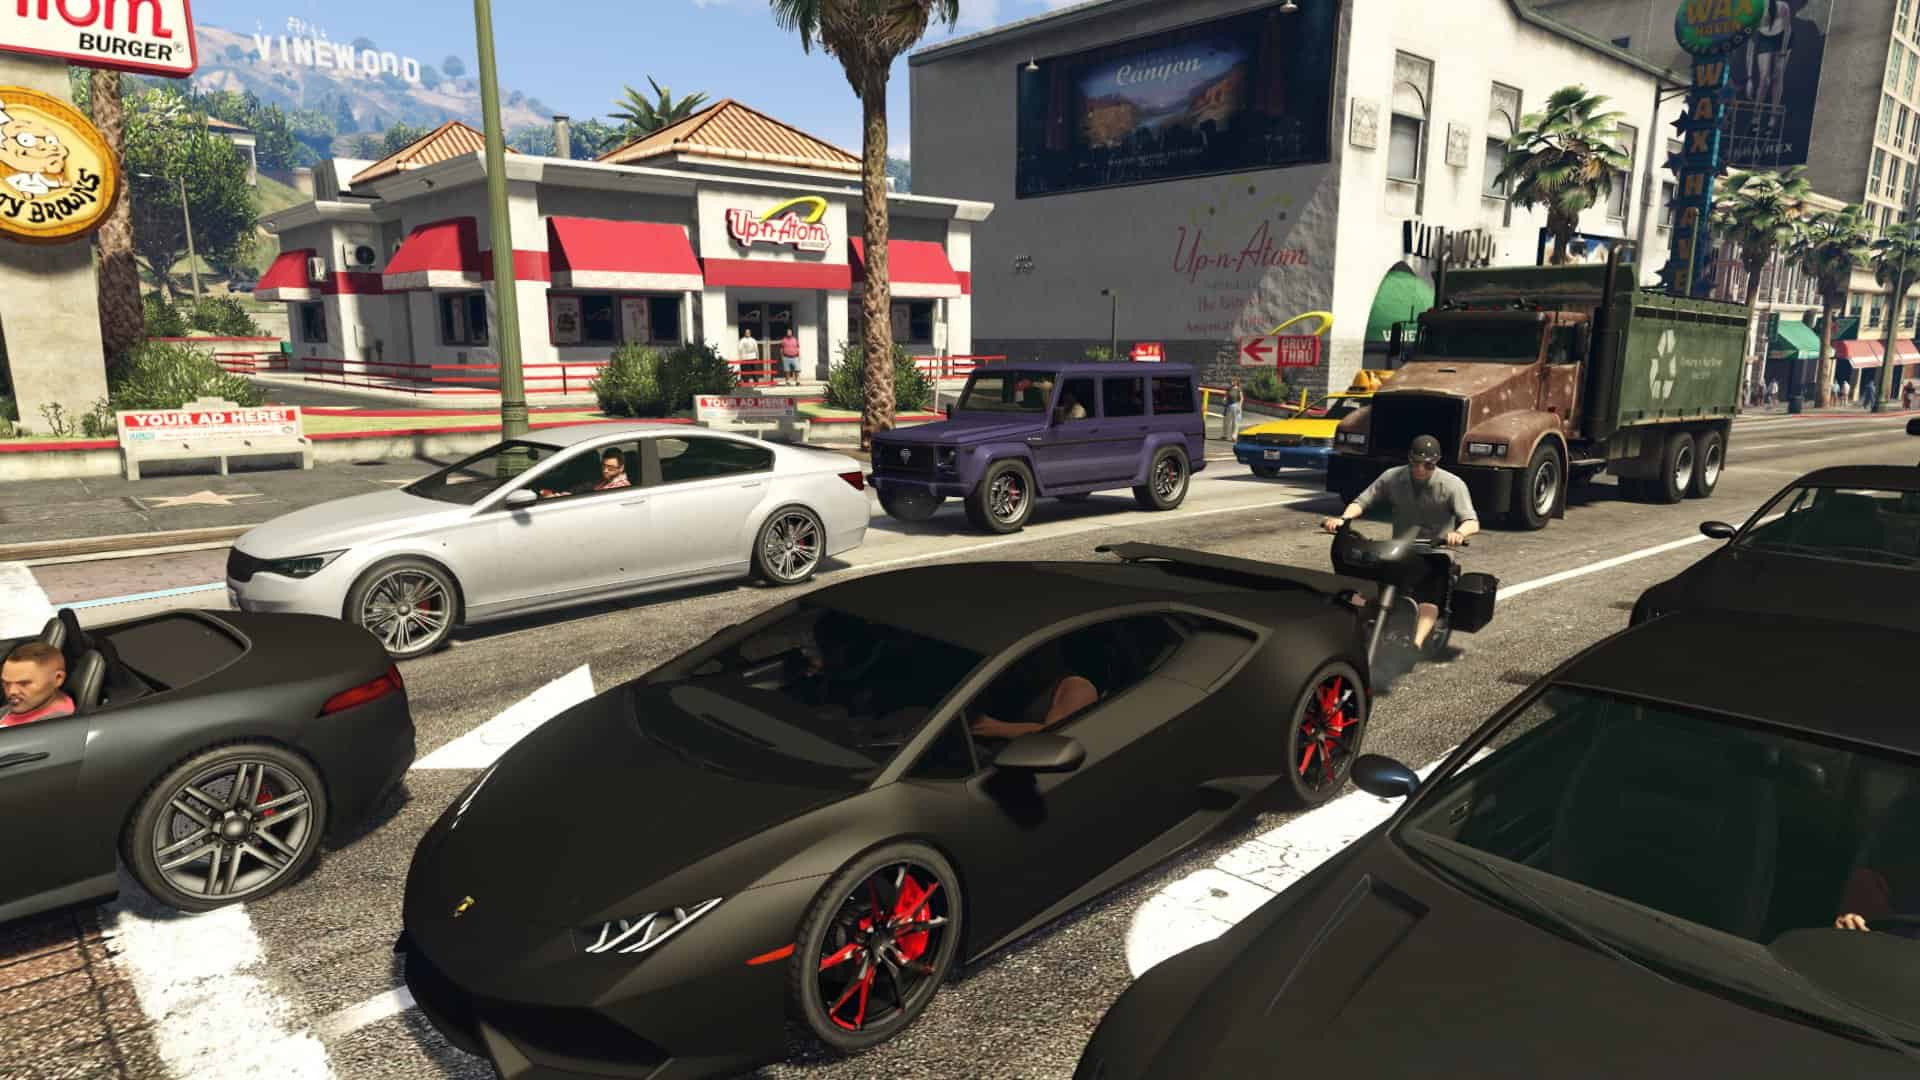 Grand Theft Auto 6 Update Top 5 Features Fans Want Removed from GTA 5 for a Better Gaming Experience--